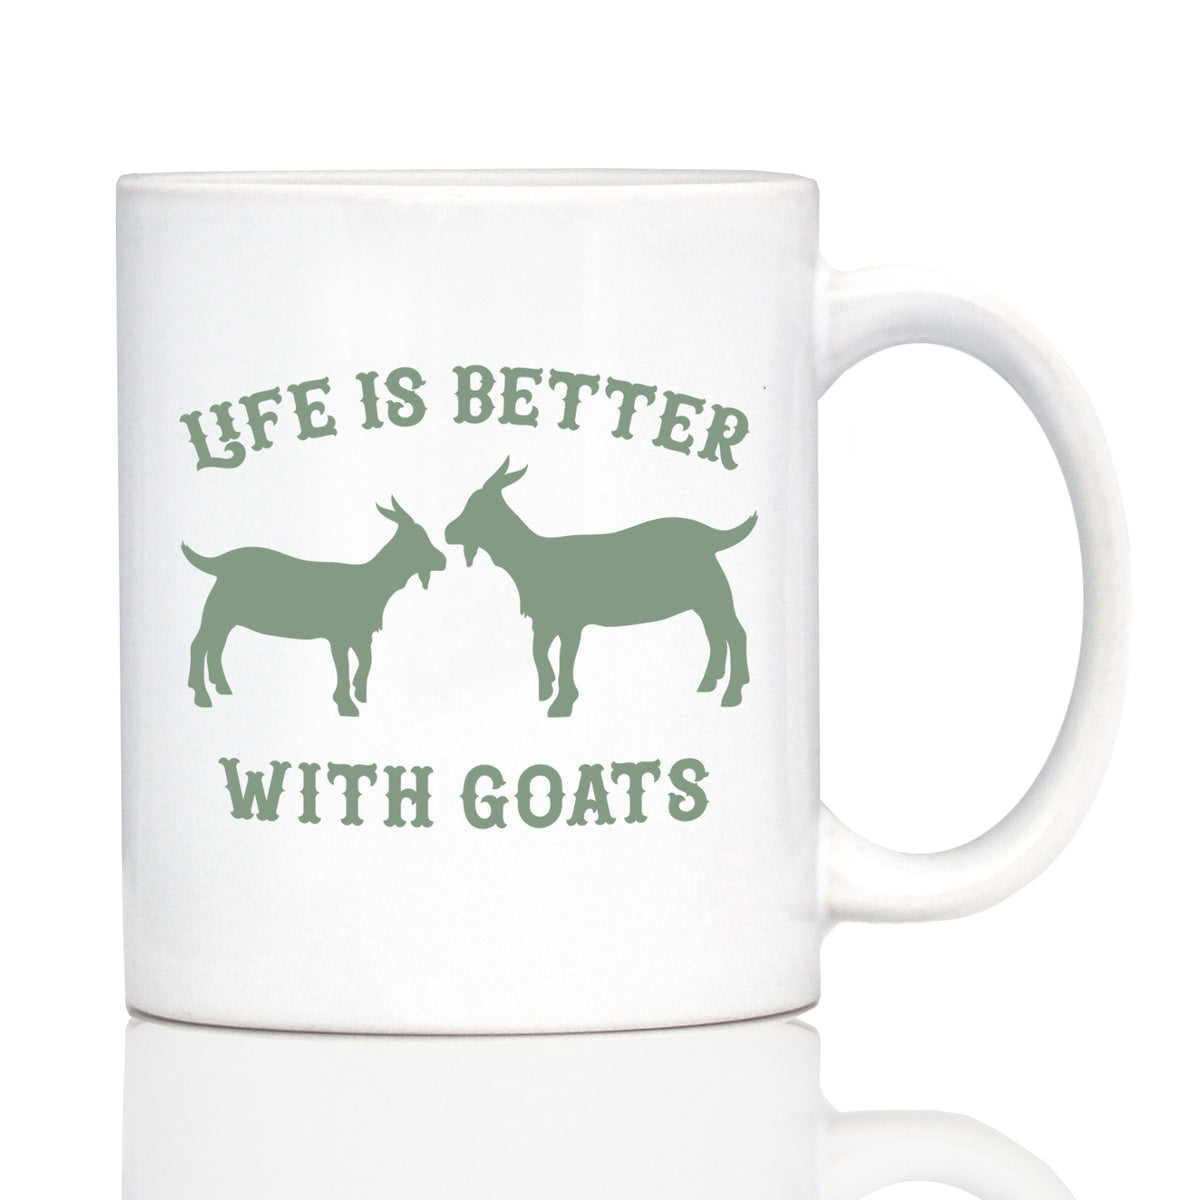 Life is Better with Goats - Funny Coffee Mug - Goat Gifts and Decor for Women and Men